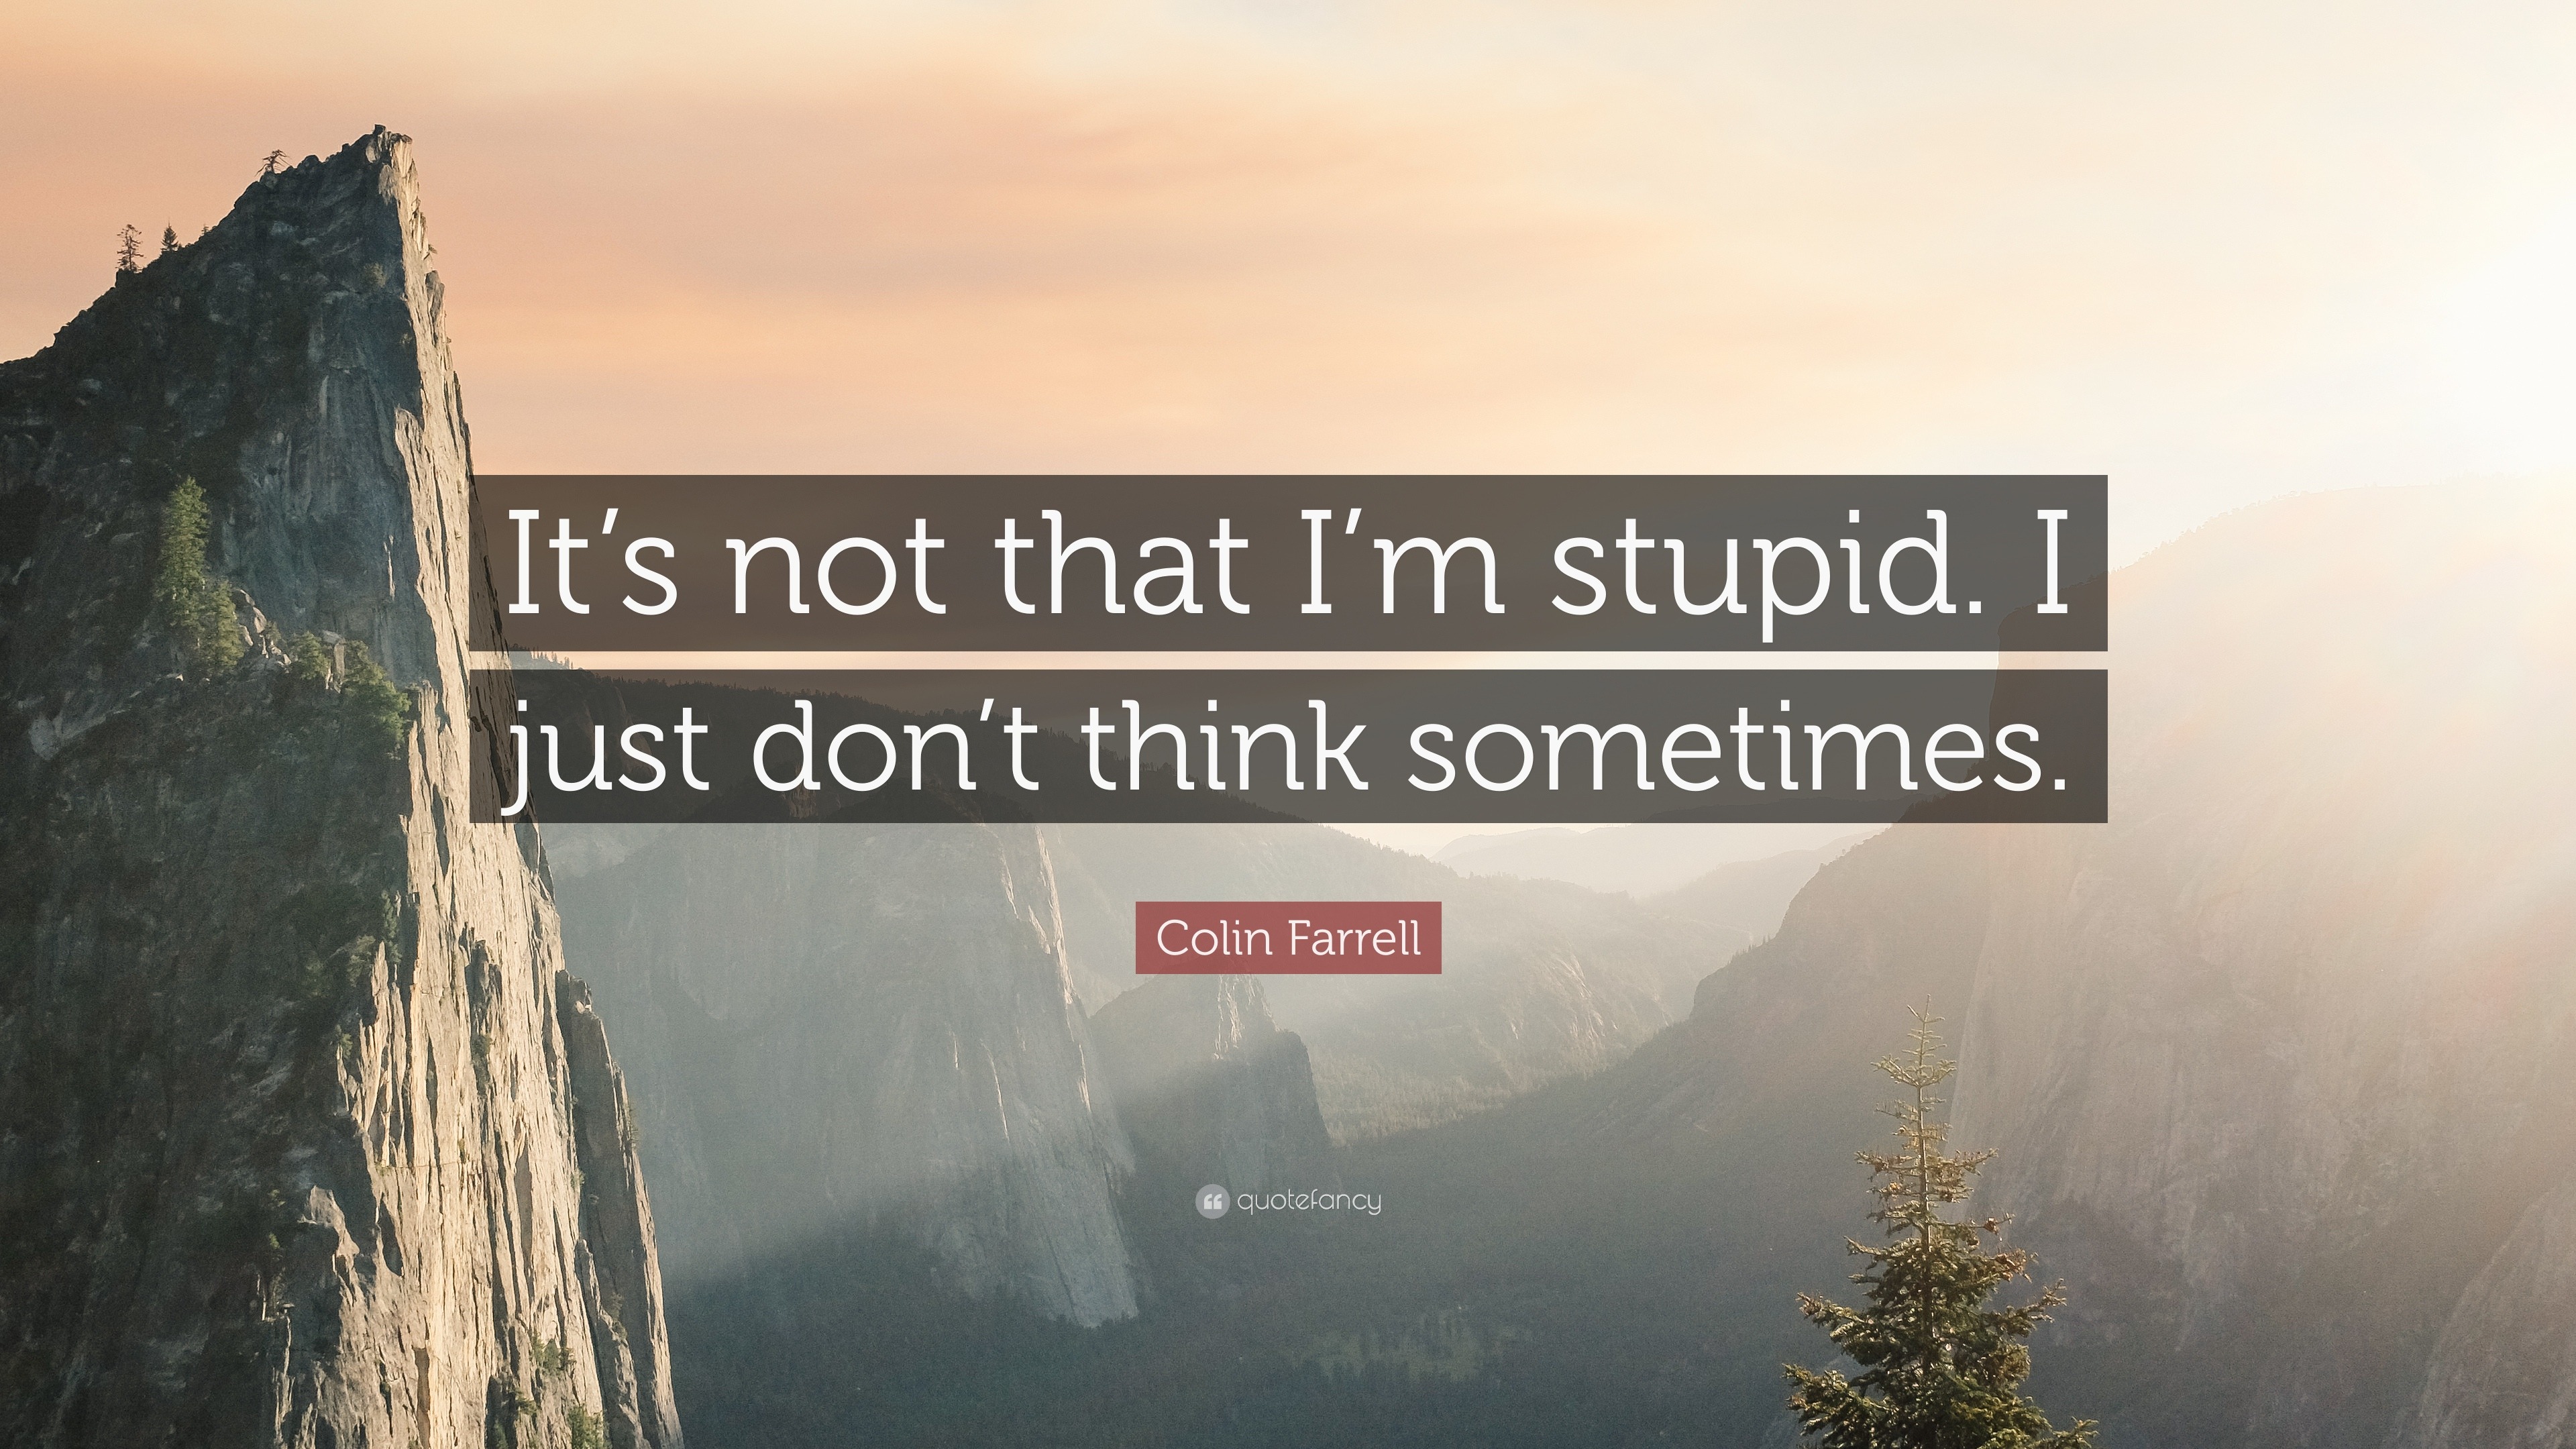 Colin Farrell Quote It S Not That I M Stupid I Just Don T Think Sometimes